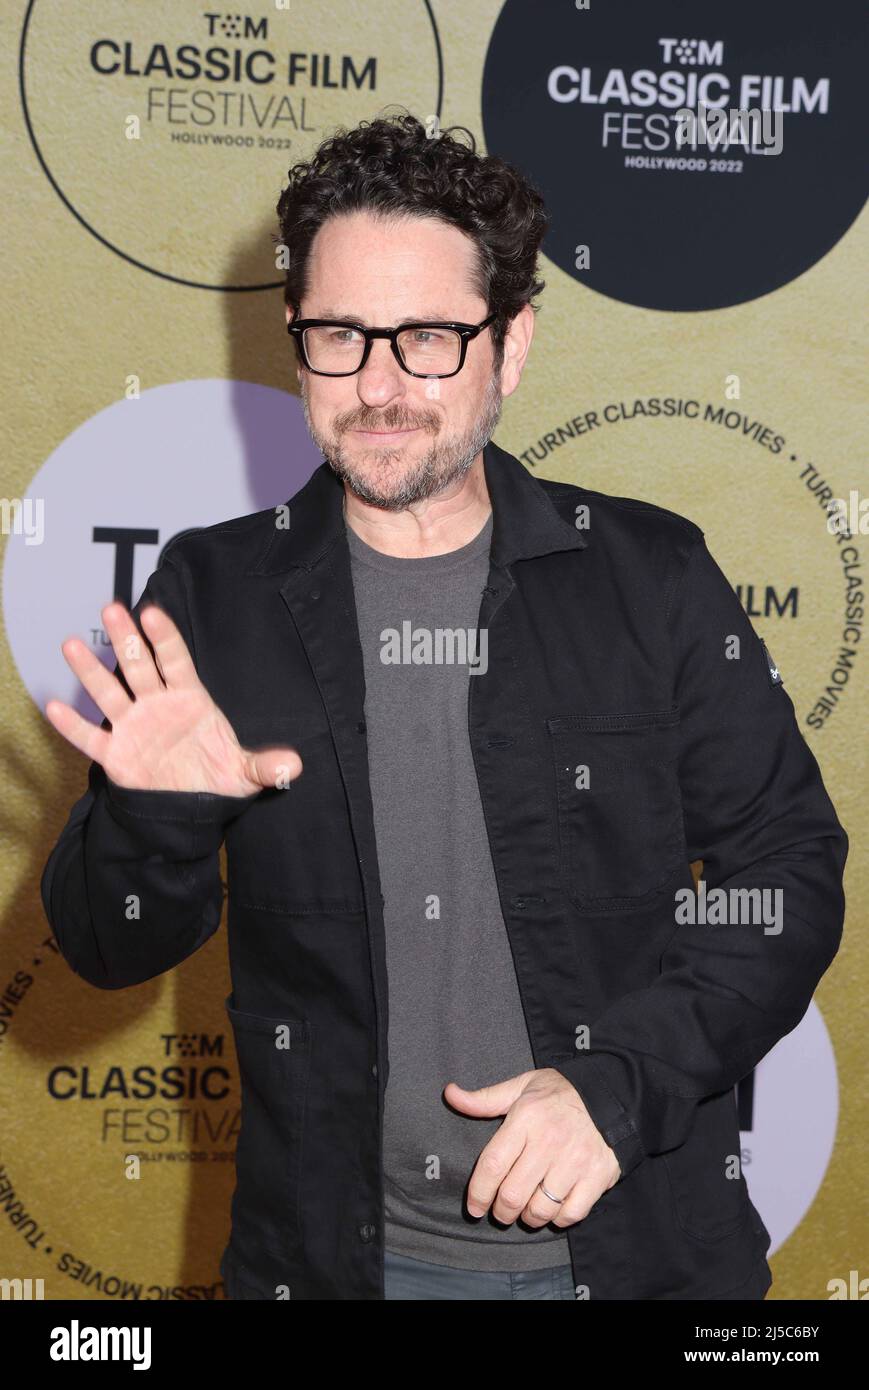 Los Angeles, USA. 21st Apr, 2022. J.J. Abrams 2022/04/21 The 40th Anniversary Screening of “E.T. the Extra-Terrestrial” held at TCL Chinese Theatre in Hollywood, CA, Credit: Cronos/Alamy Live News Stock Photo